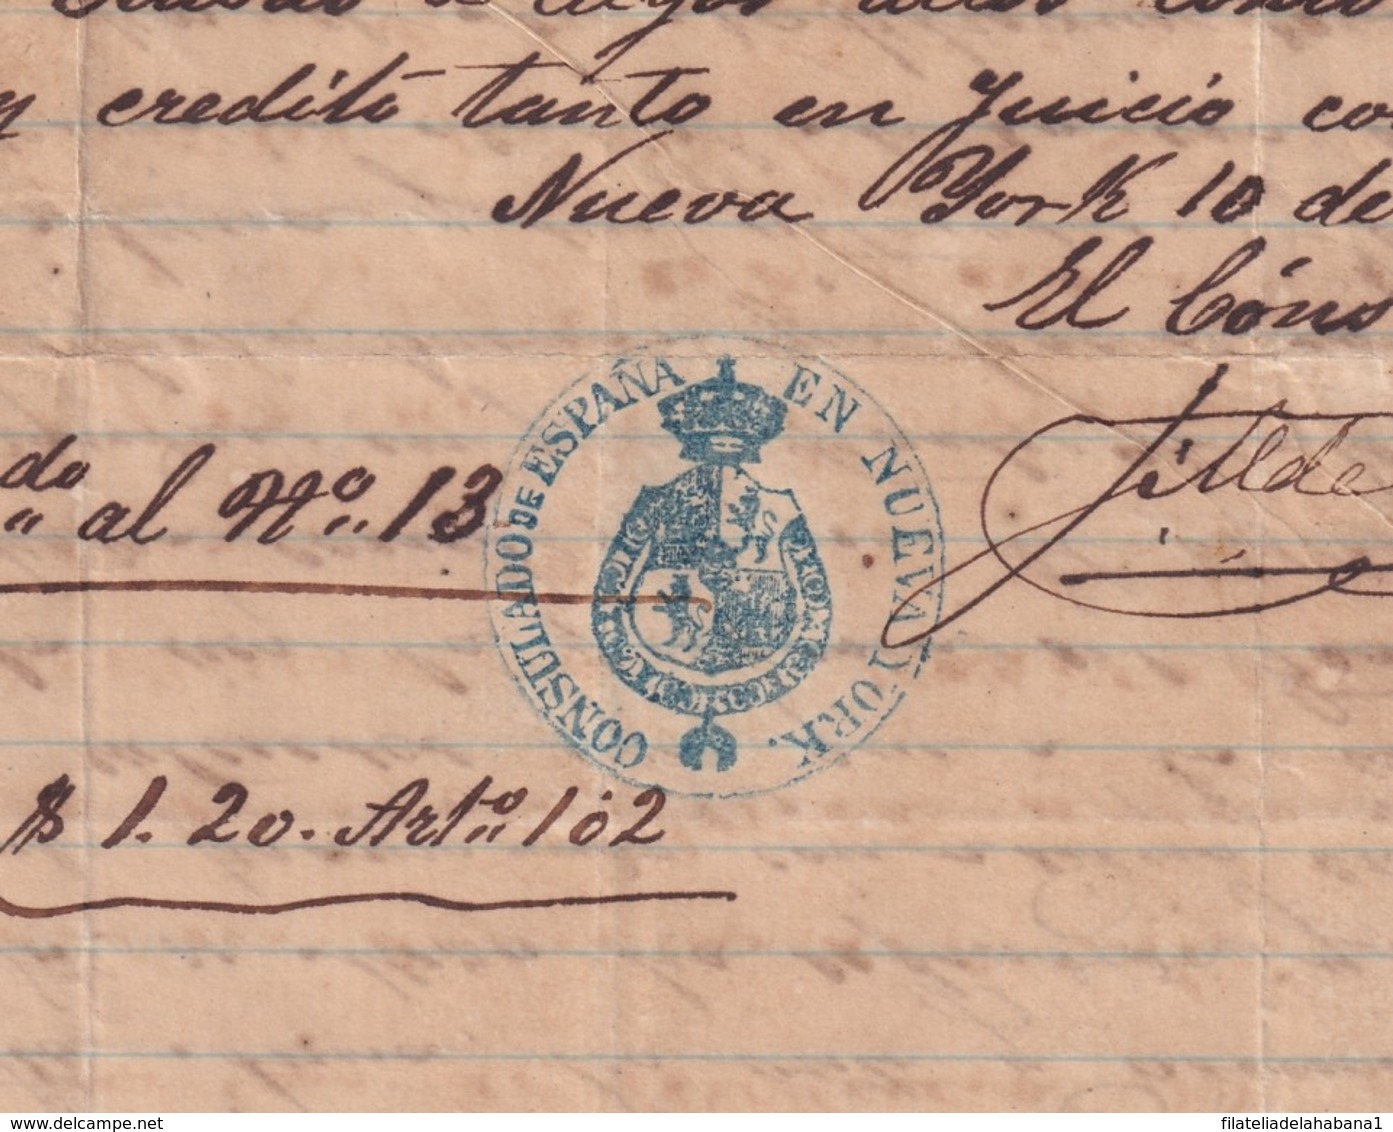 E6371 US 1868 PUBLIC NOTARY REGISTERED REVENUE IN SPAIN CONSULATE IN NEW YORK. - Manuscrits